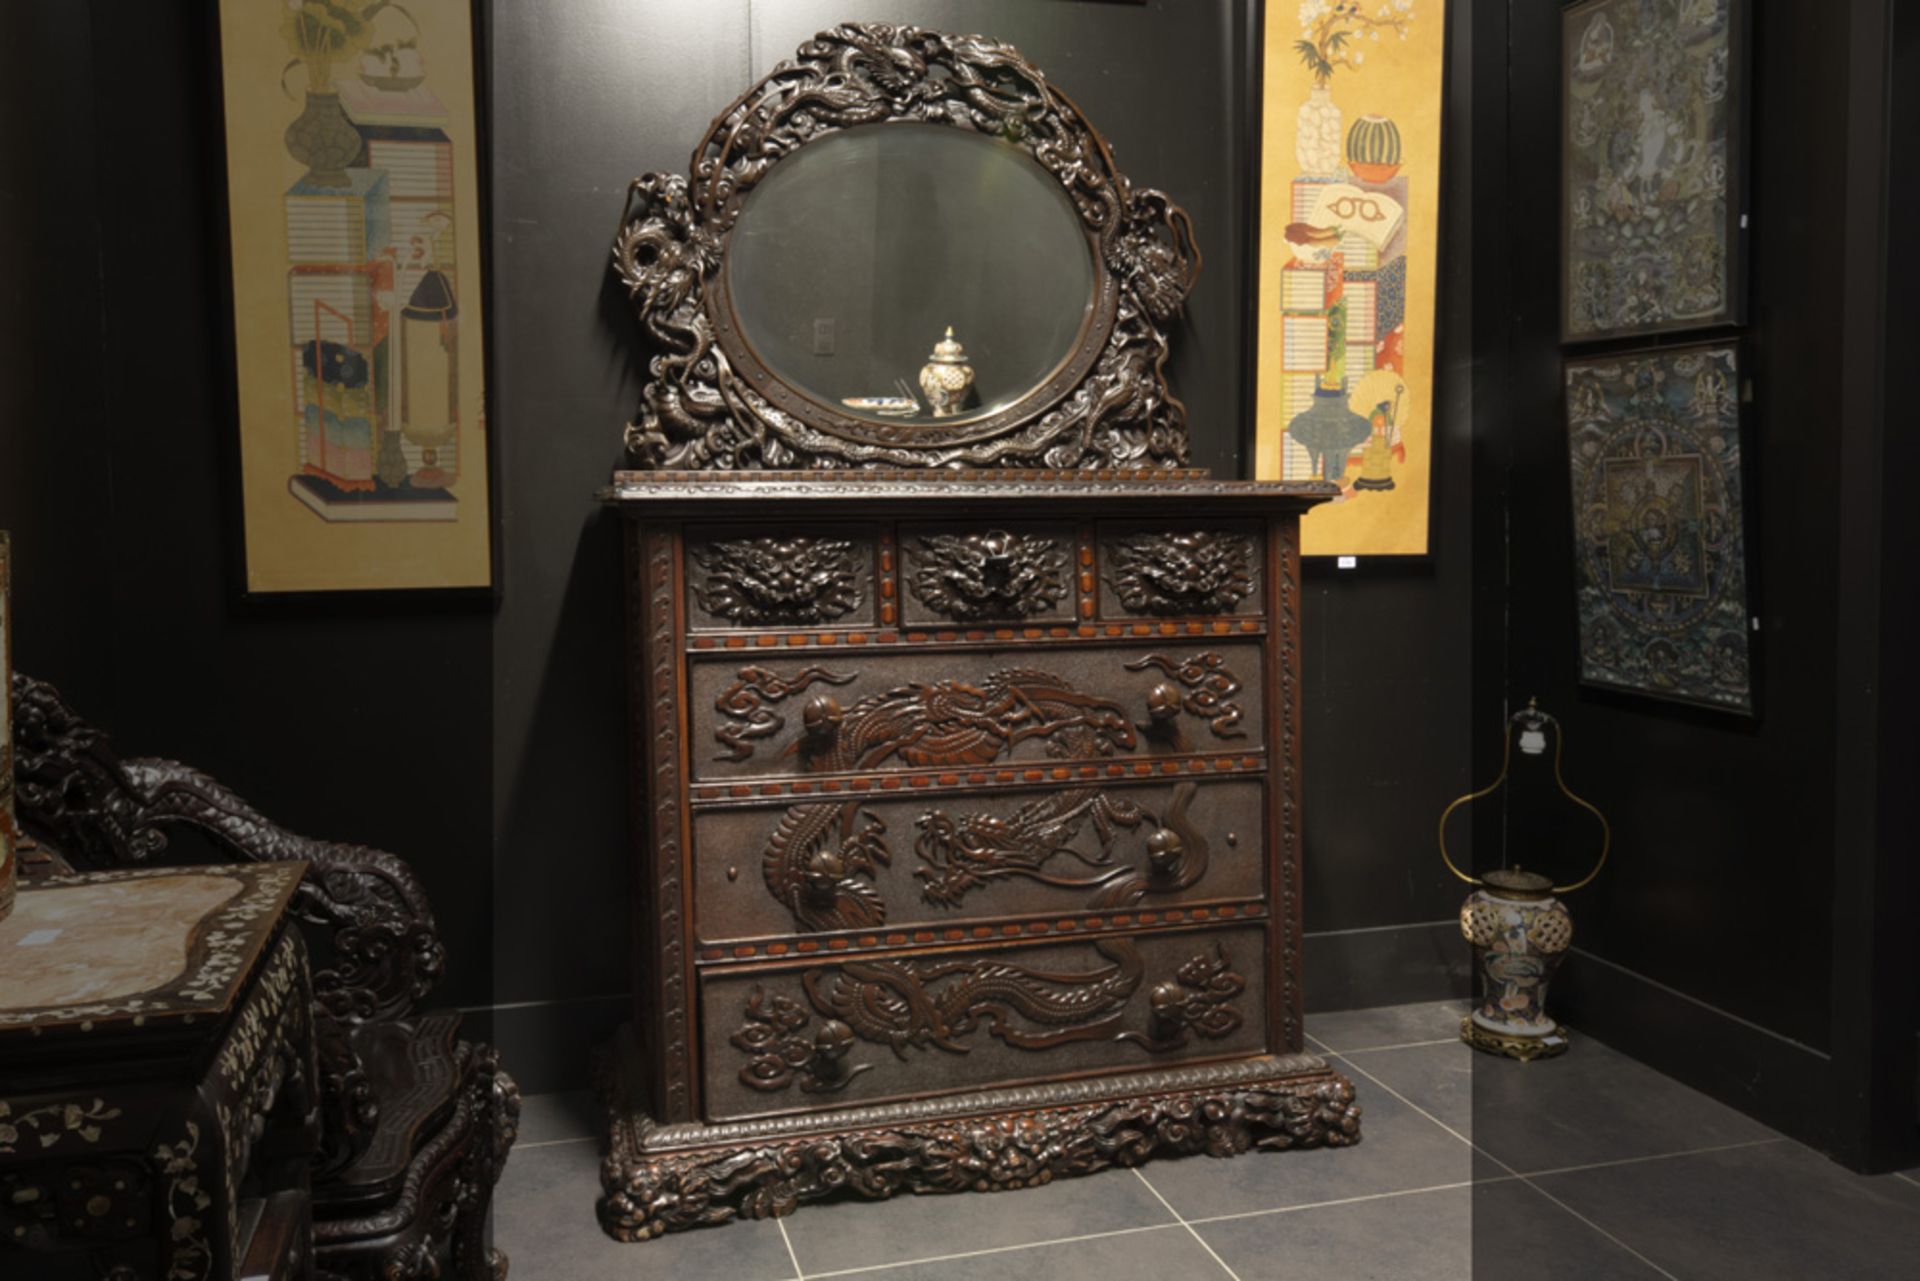 antique Chinese coiffeuse/chest of drawers with top with mirror in richly sculpted (rose- ?) wood ||